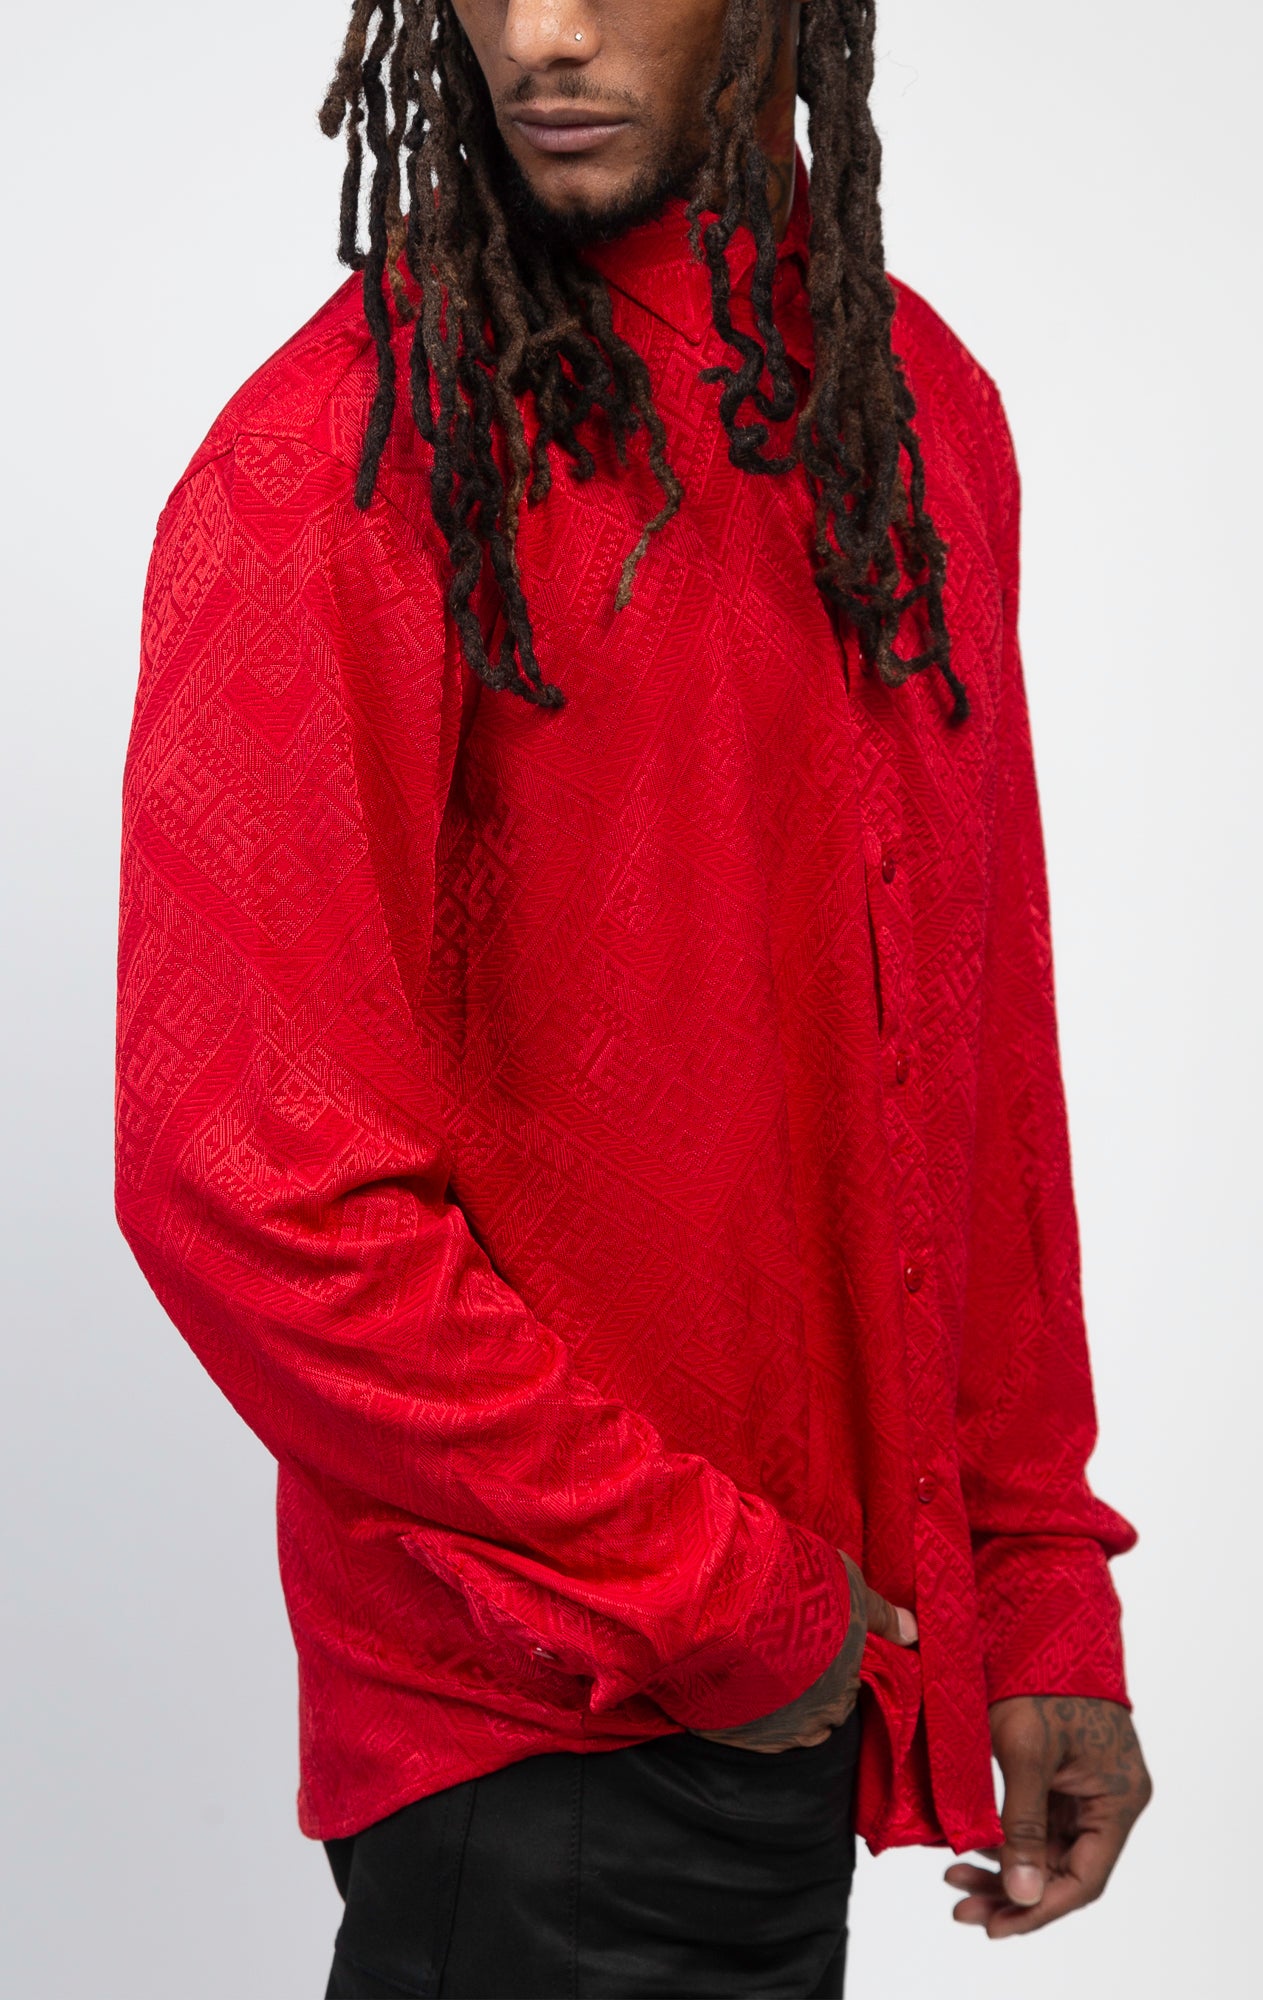 Red stylish and comfortable slim-fit long-sleeve shirt featuring a soft and breathable fabric, an eye-catching all-over seamless pattern, and a versatile design.